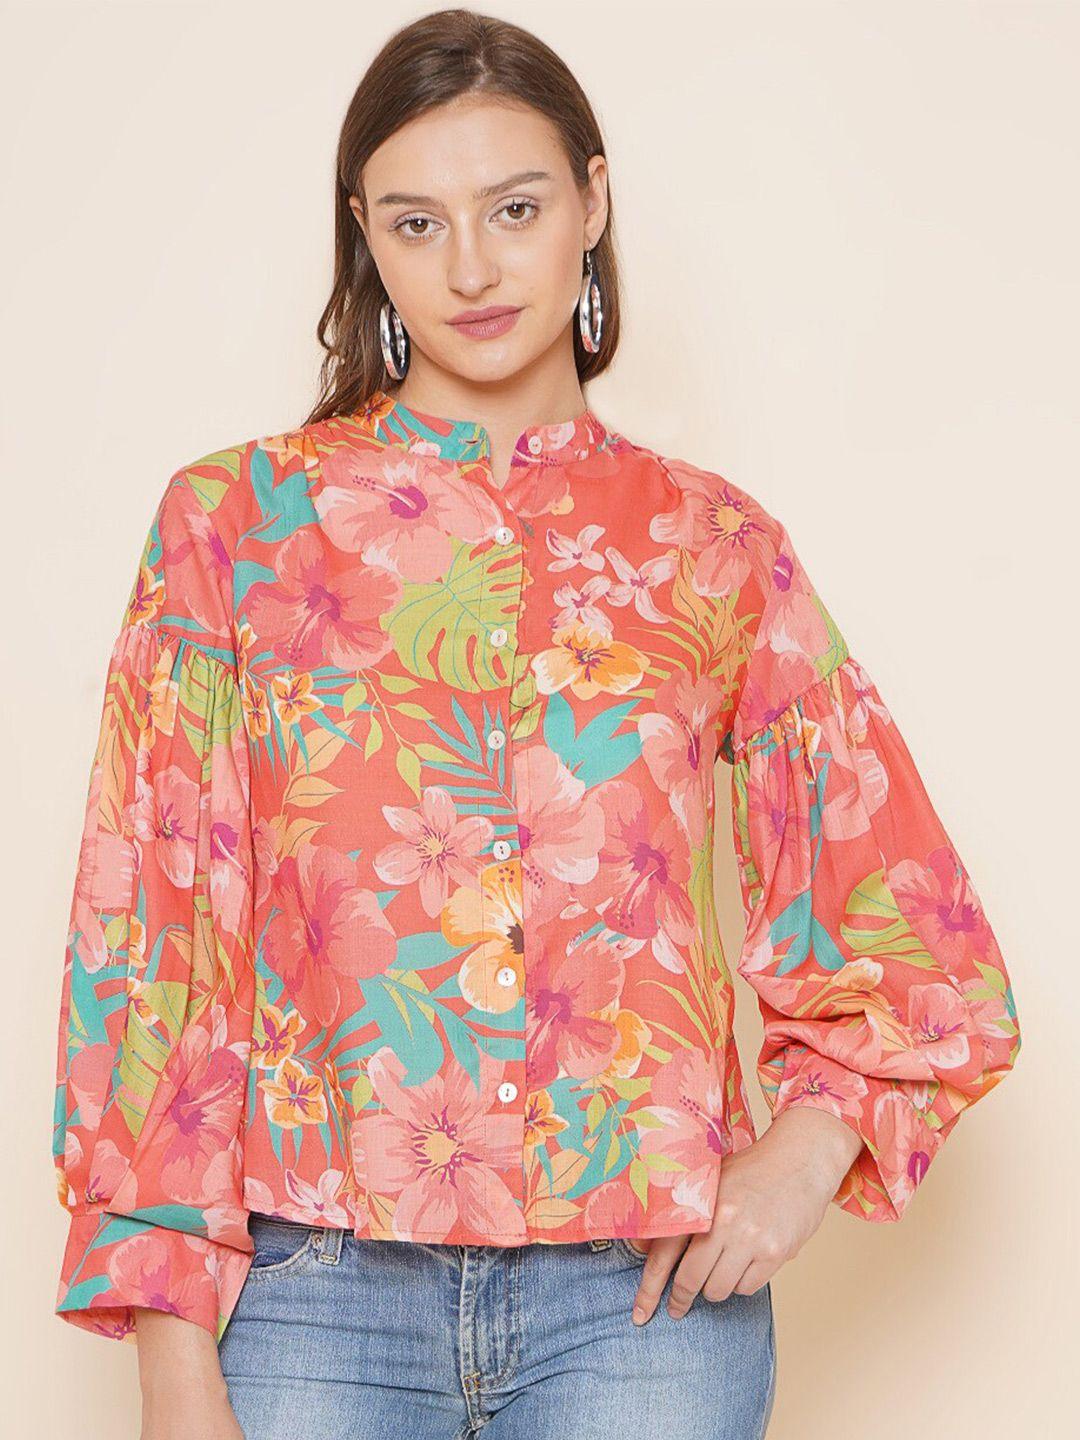 bhama couture floral printed band collar cotton shirt style top